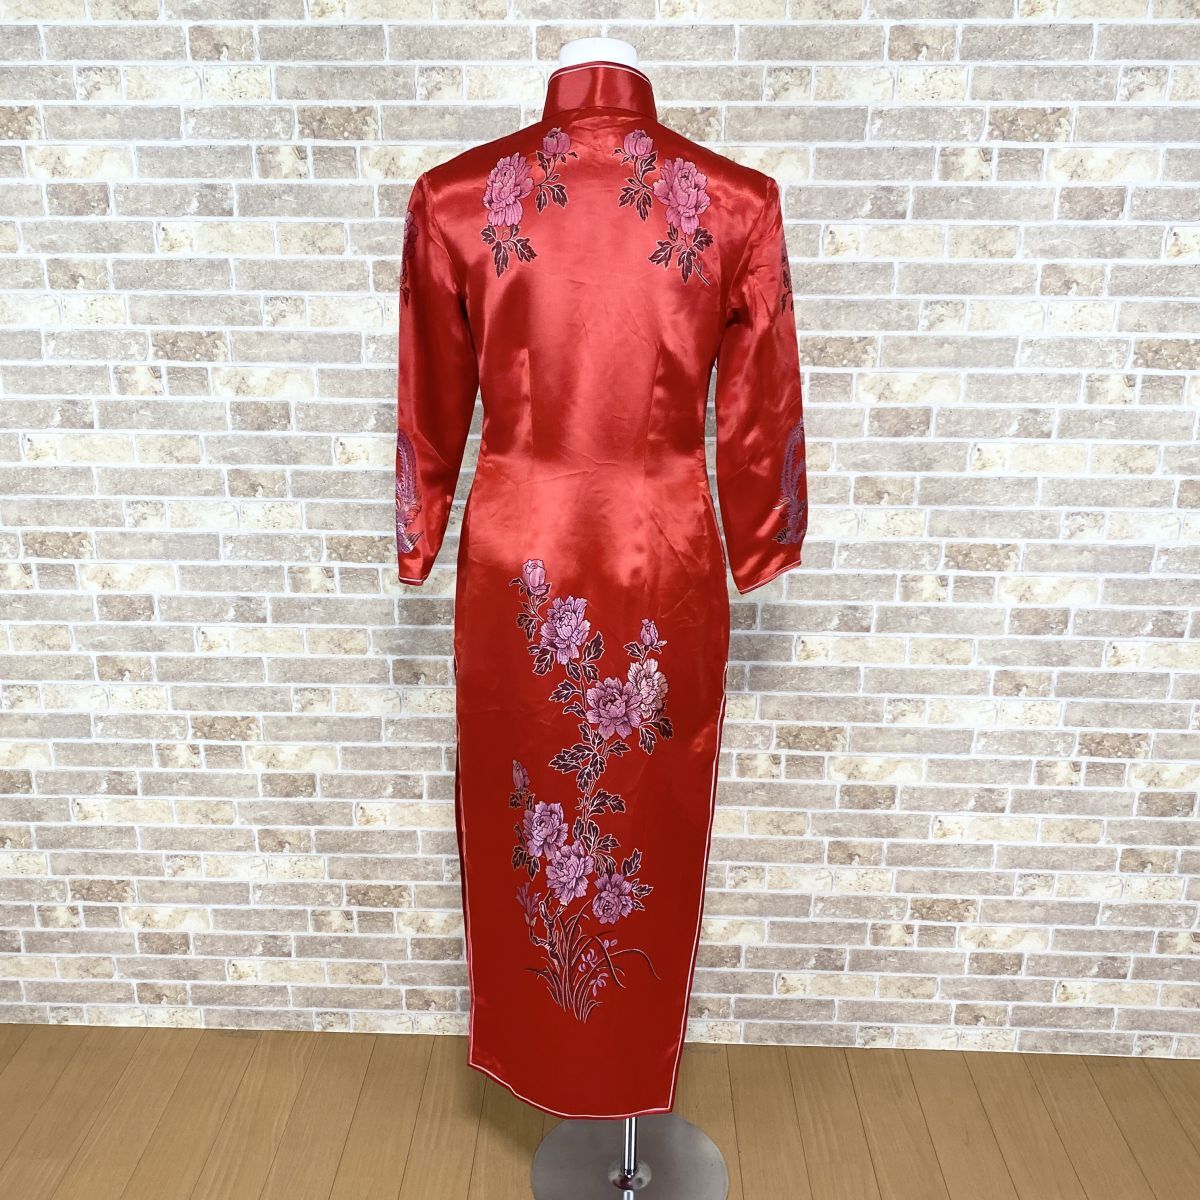 1 jpy China dress dragon . middle type clothes equipment quotient shop manager sleeve long One-piece red color dress kyabadore presentation formal used 4731